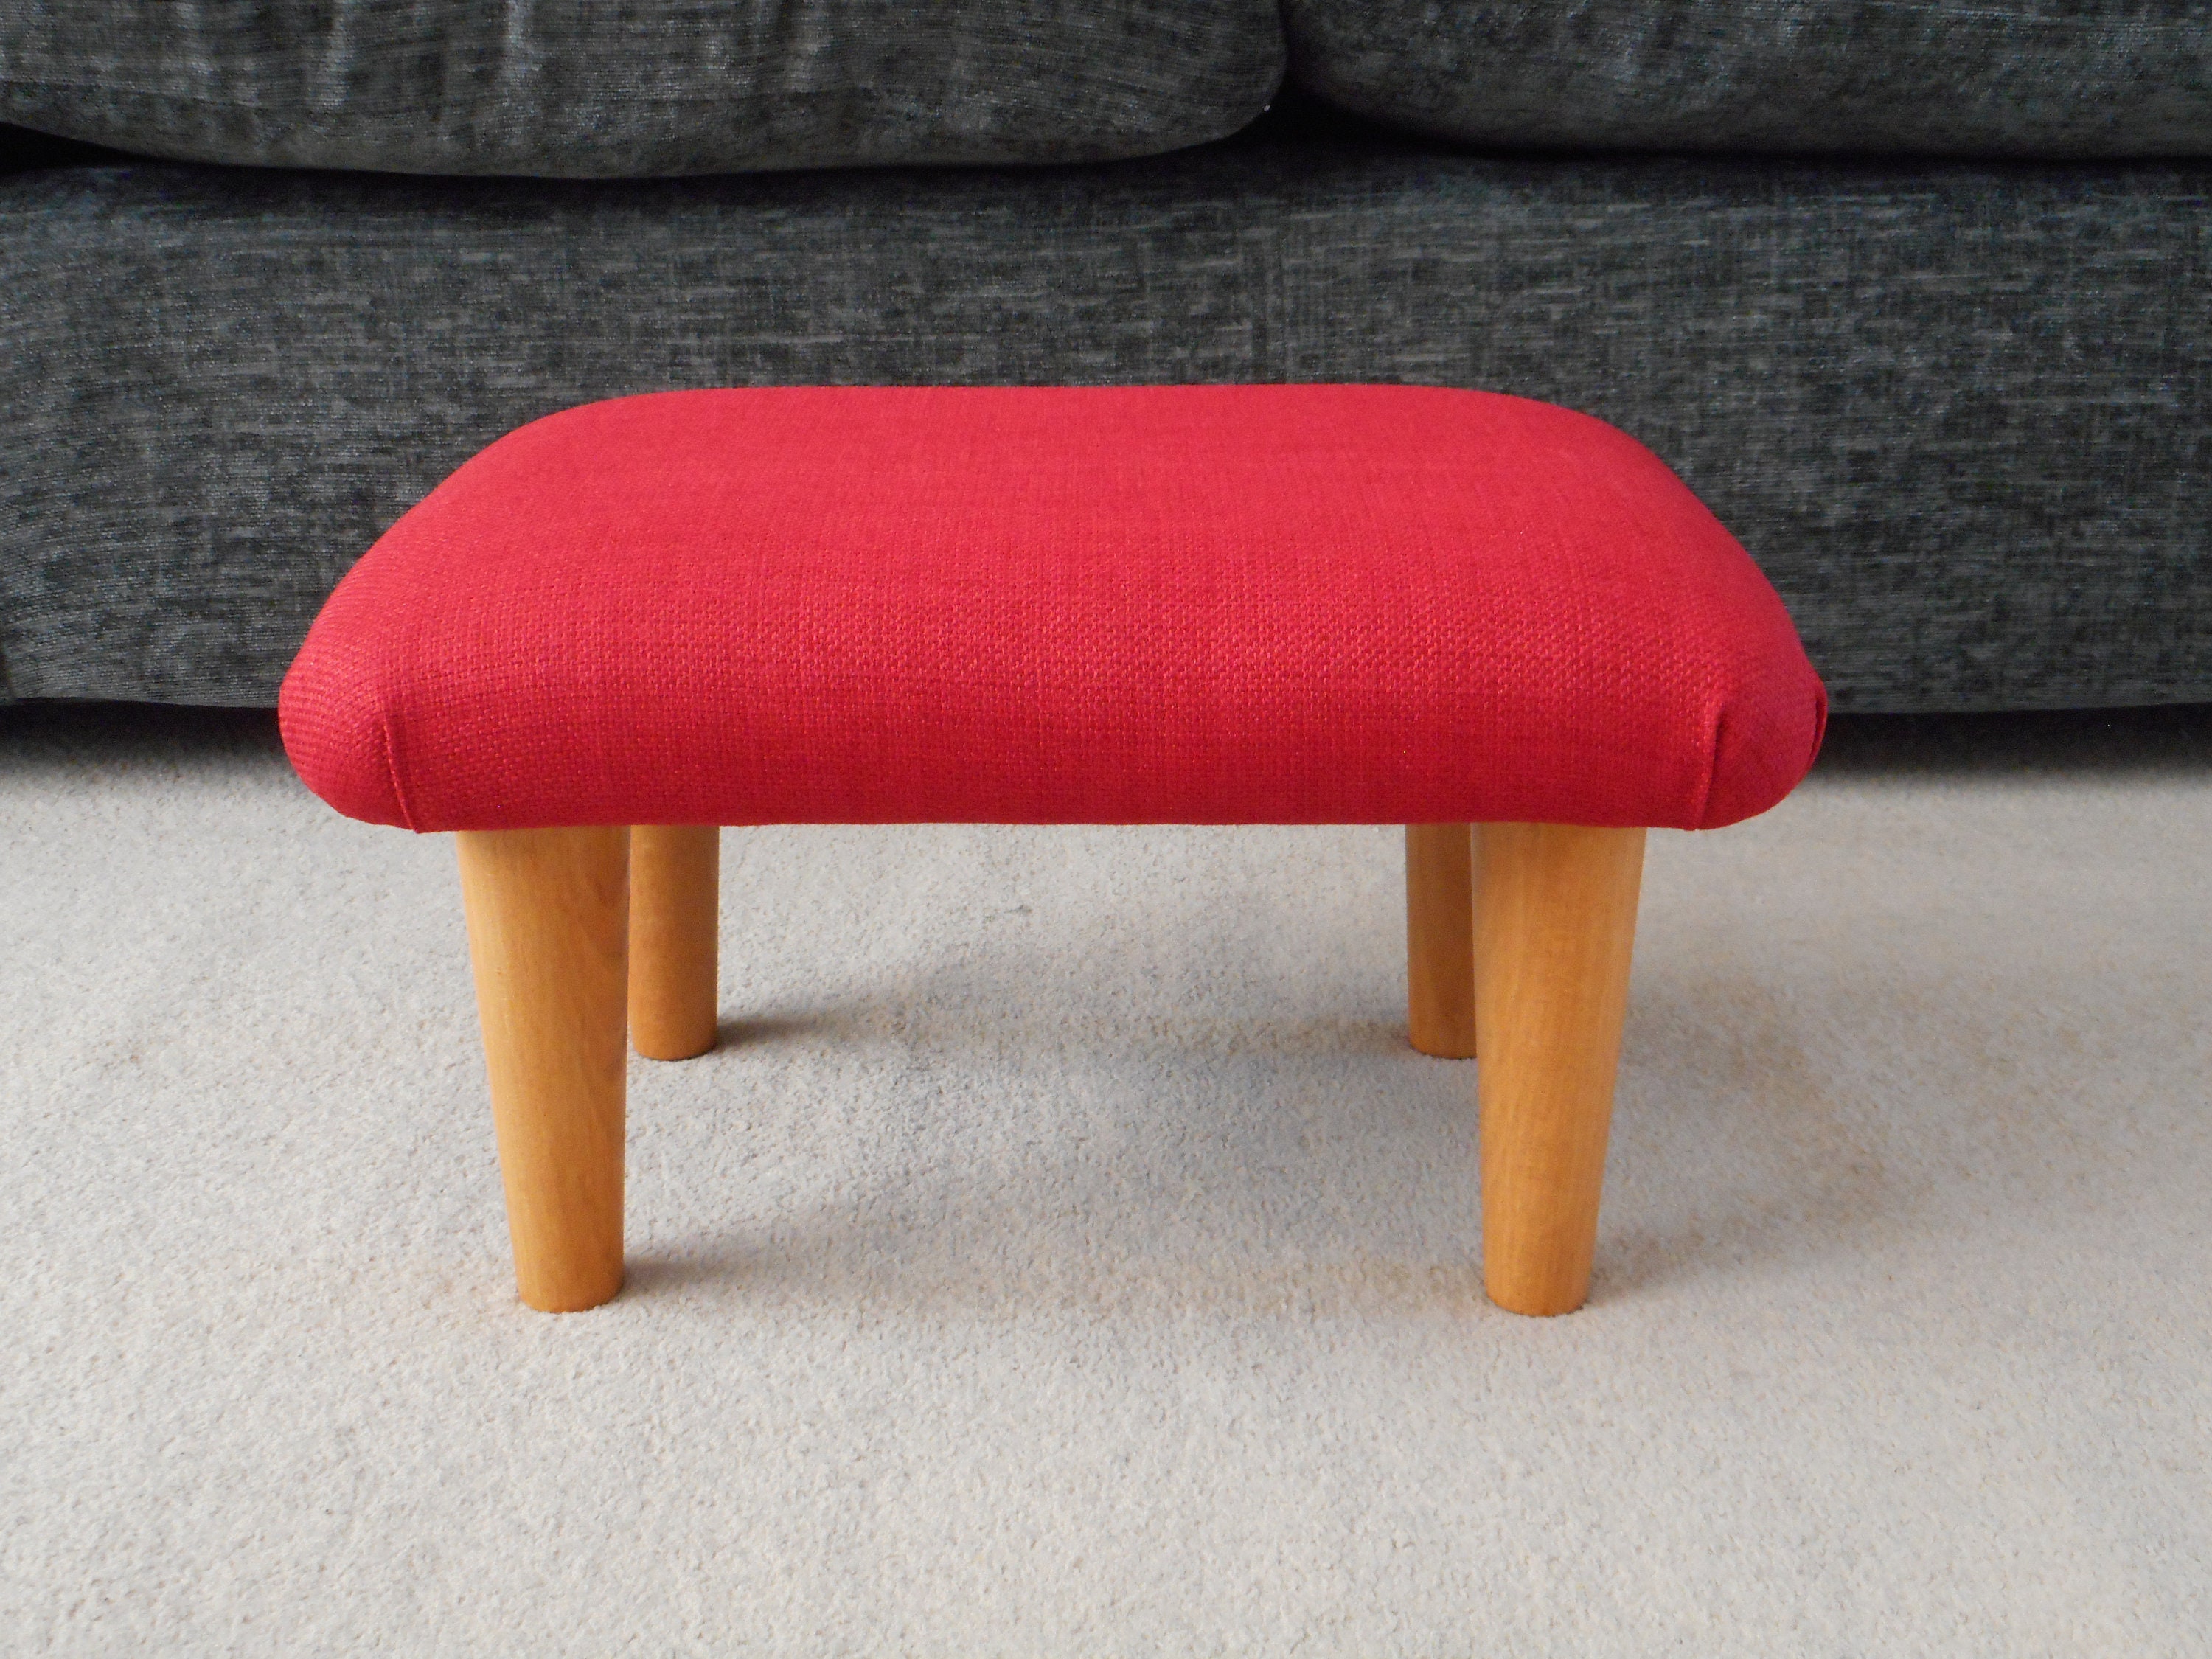 NEW Salmon Plain 10-26 Cm Solid Small Plain Footstool With Wooden or  Plastic Feet / Upholstered Handmade Footrest Bed Step Stool Pink 